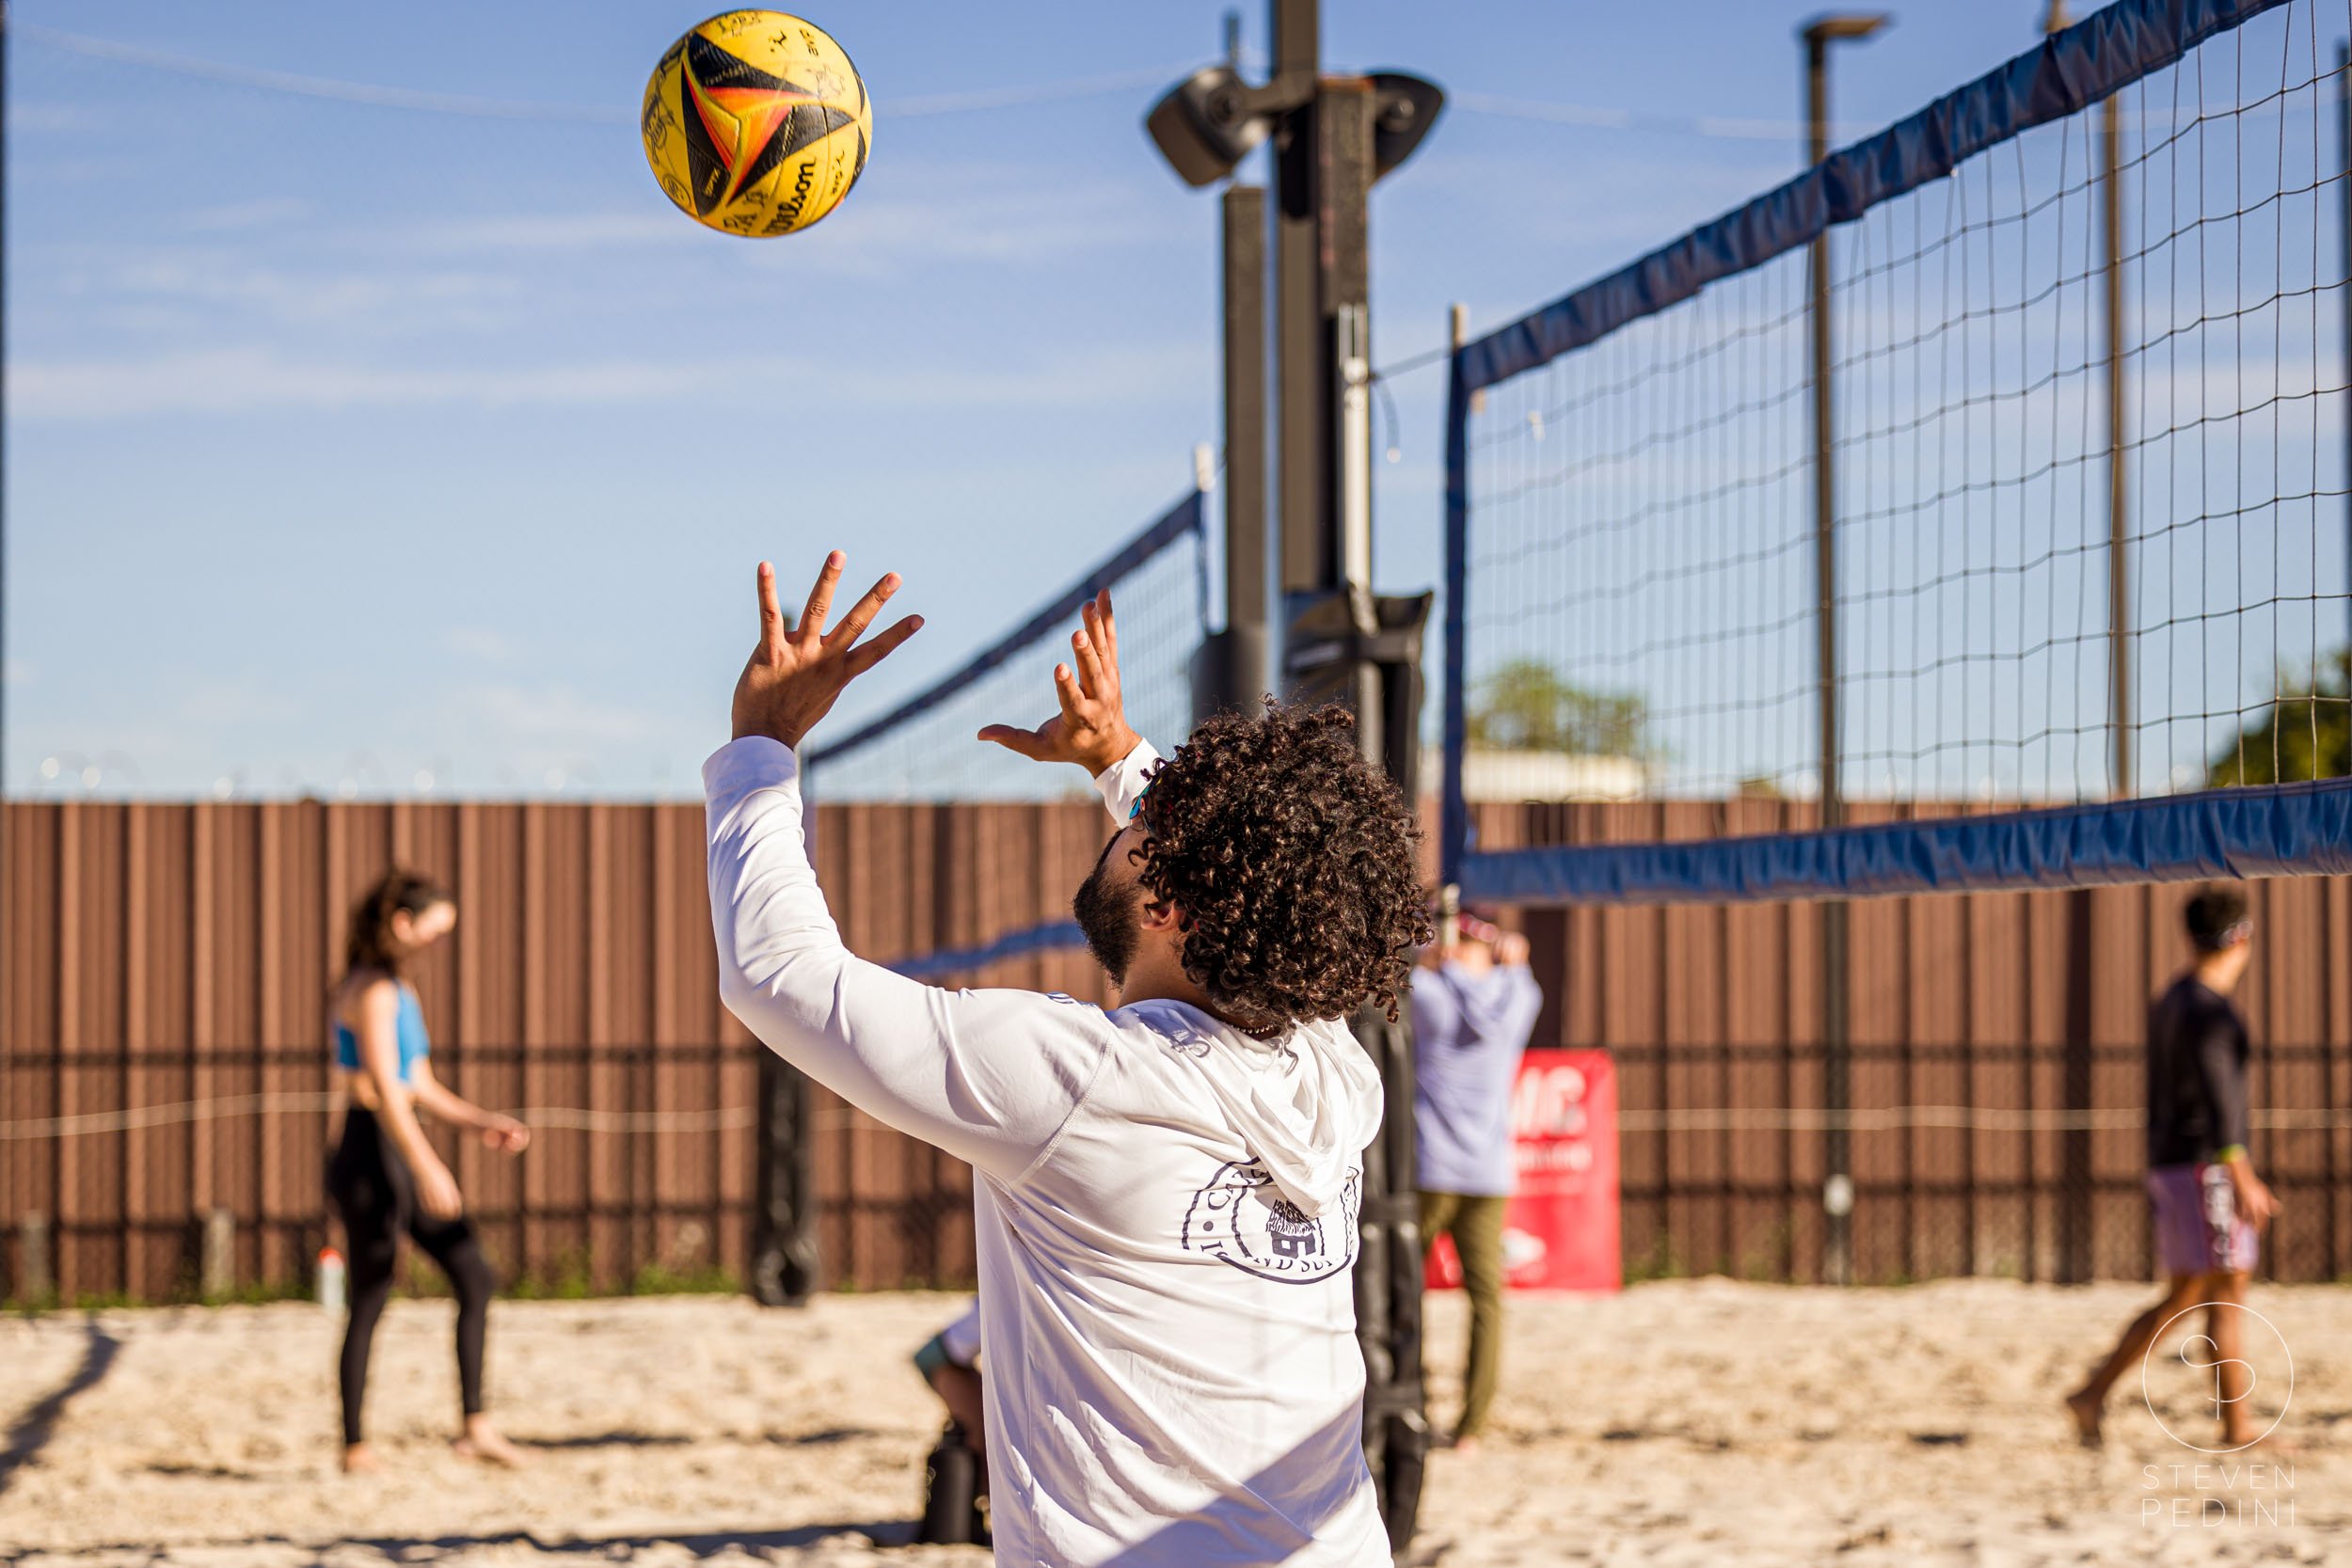 Steven Pedini Photography - Bumpy Pickle - Sand Volleyball - Houston TX - World Cup of Volleyball - 00005.jpg